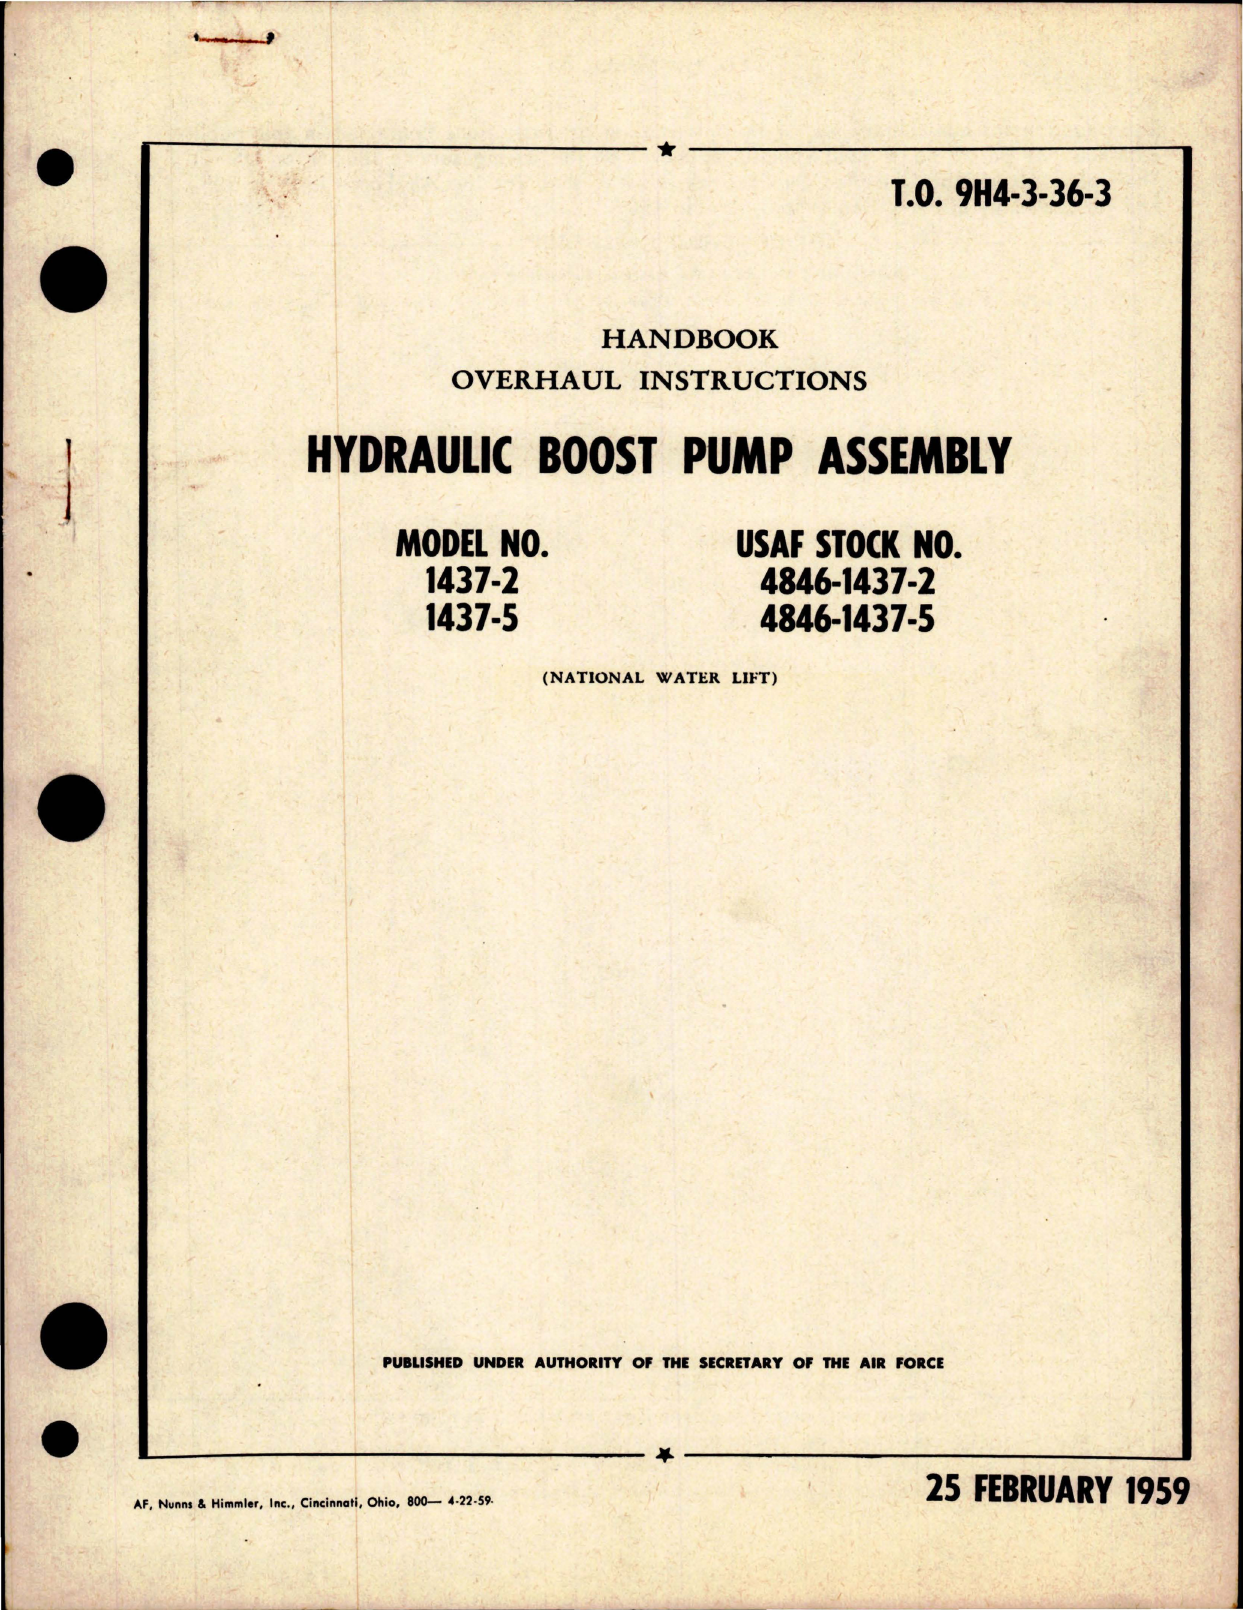 Sample page 1 from AirCorps Library document: Overhaul Instructions for Hydraulic Boost Pump Assembly - Models 1437-2 and 1437-5